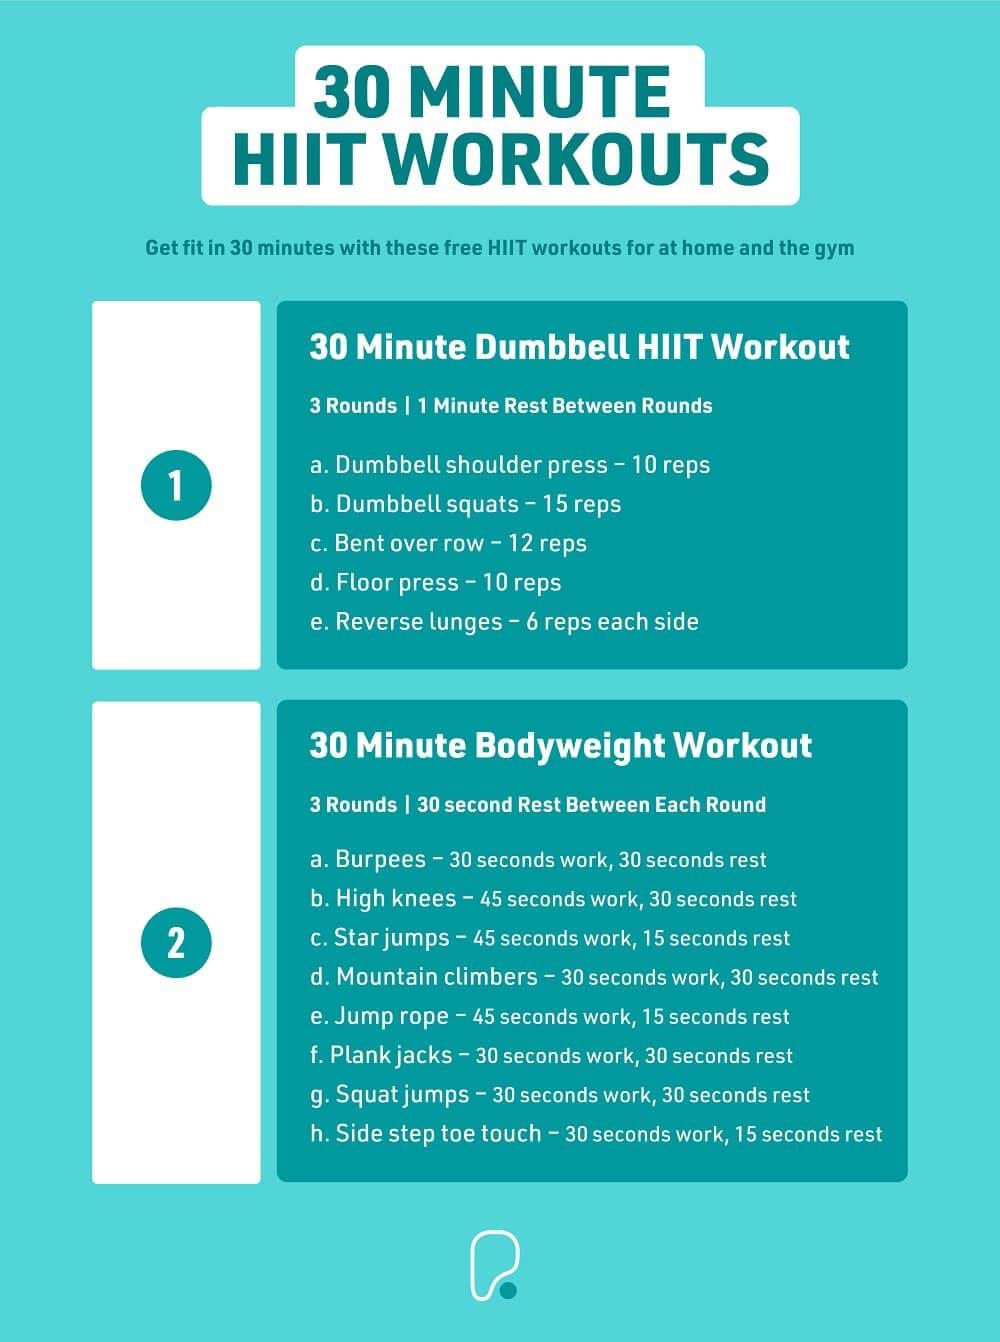 30 Minute HIIT Workouts To Try